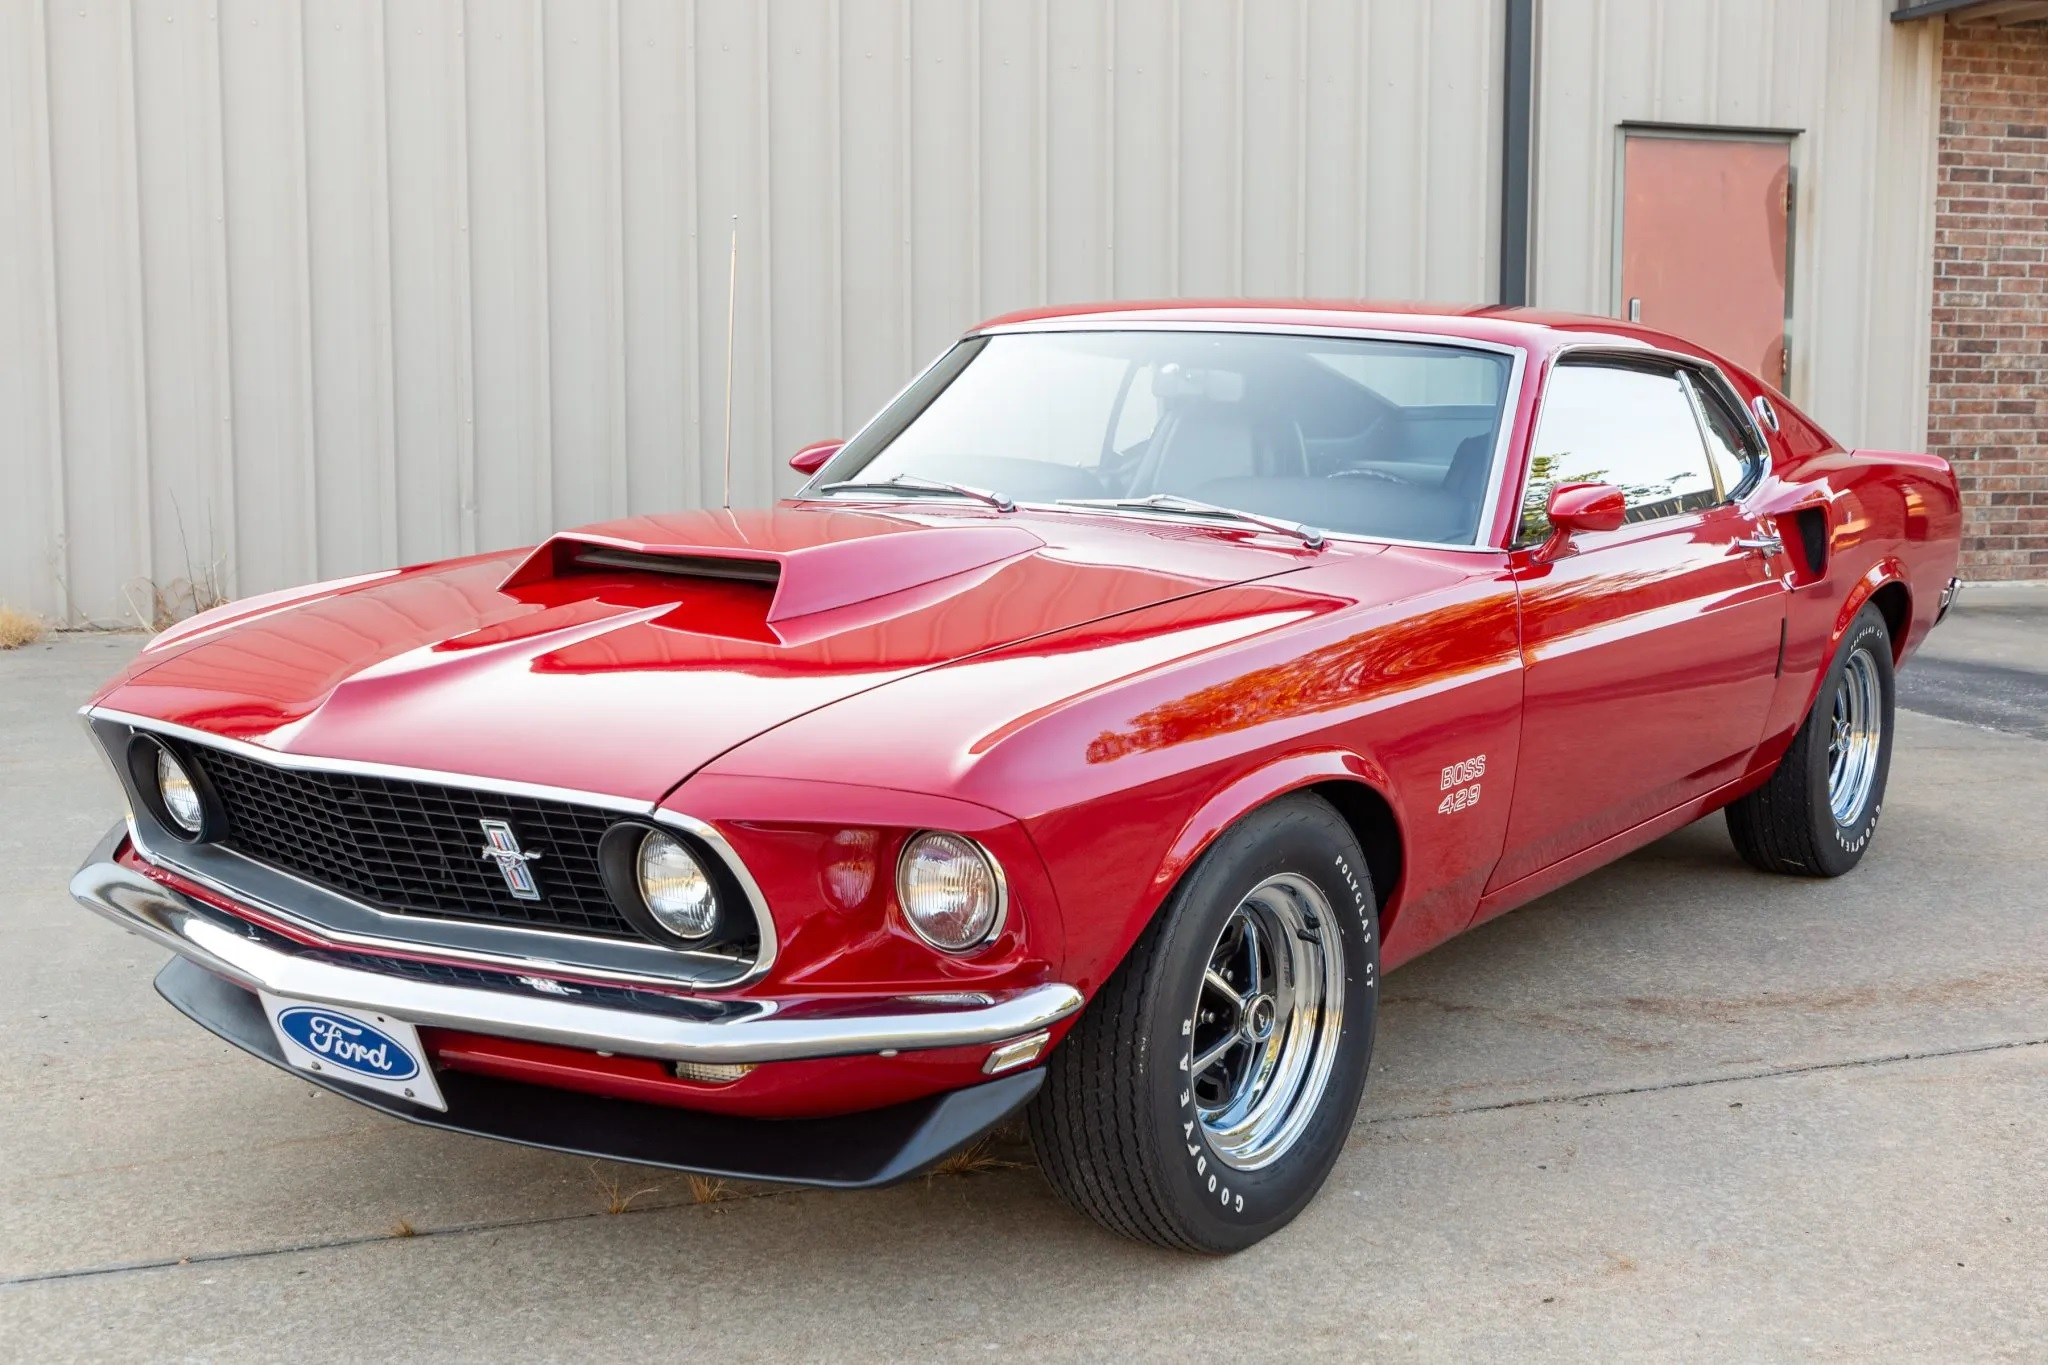 1969 Ford Mustang Boss 429 with just 4,400 miles since new